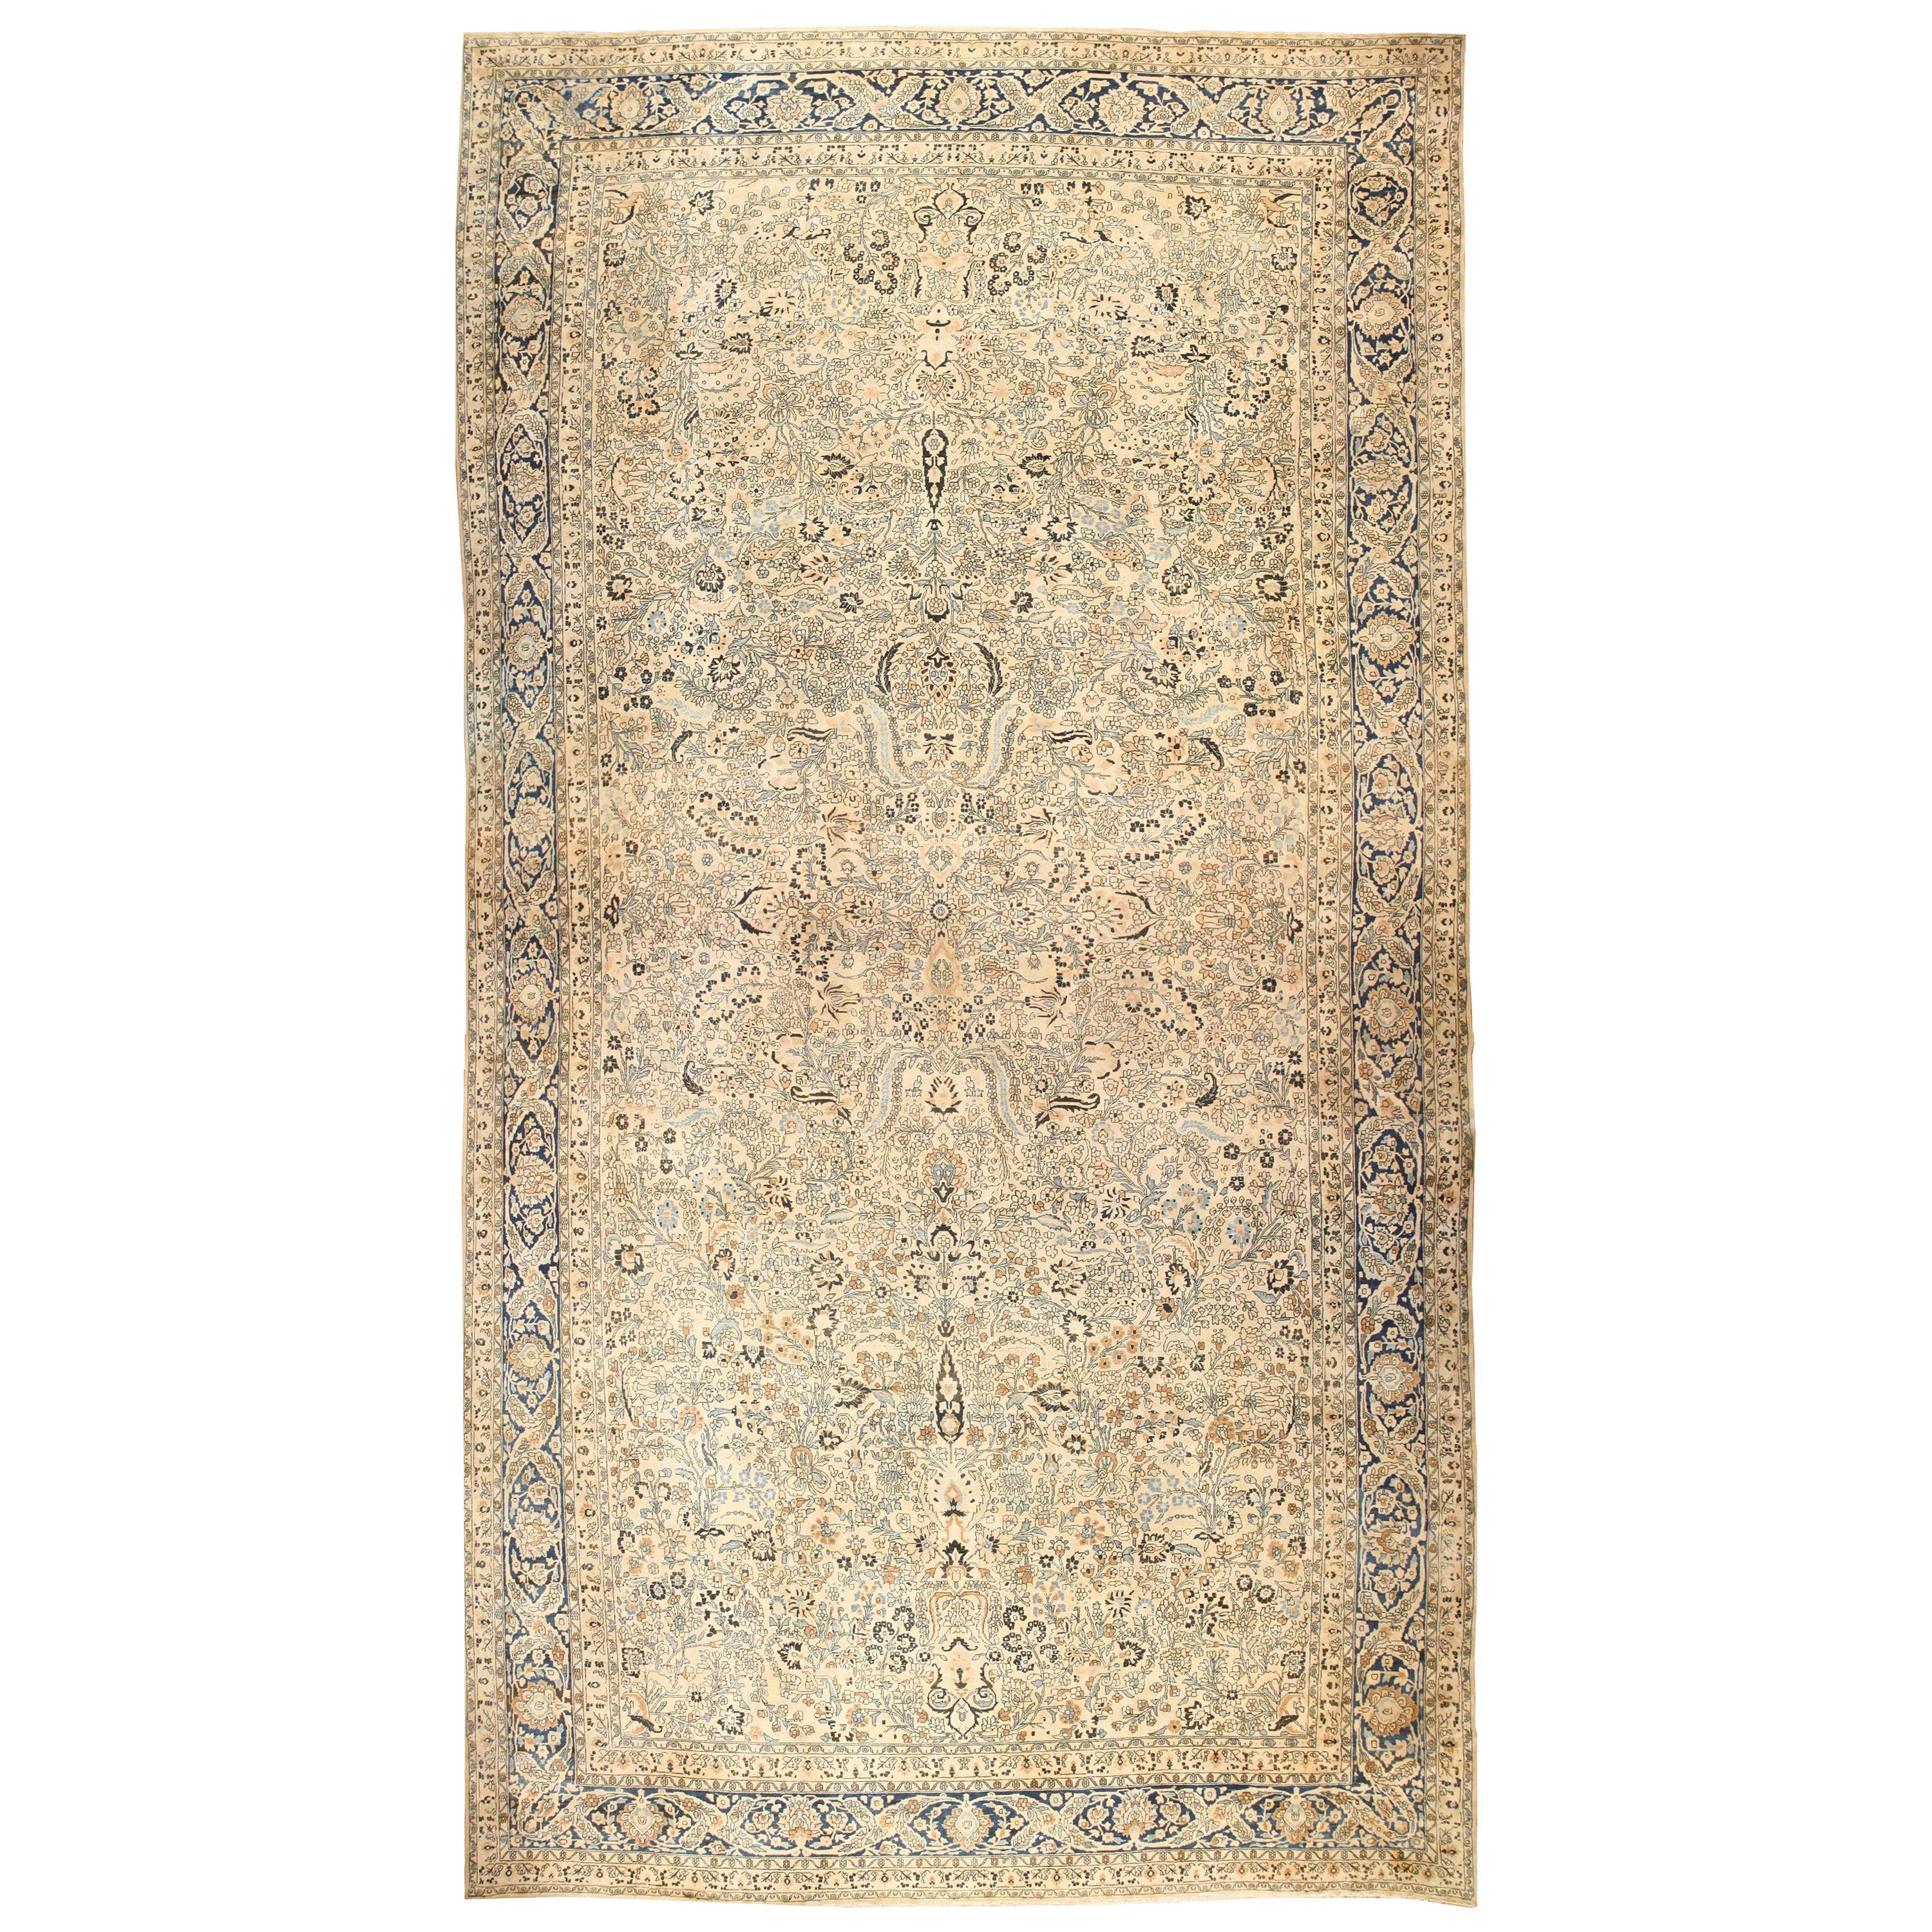 Antique Persian Khorassan Rug. Size: 14 ft 4 in x 28 ft